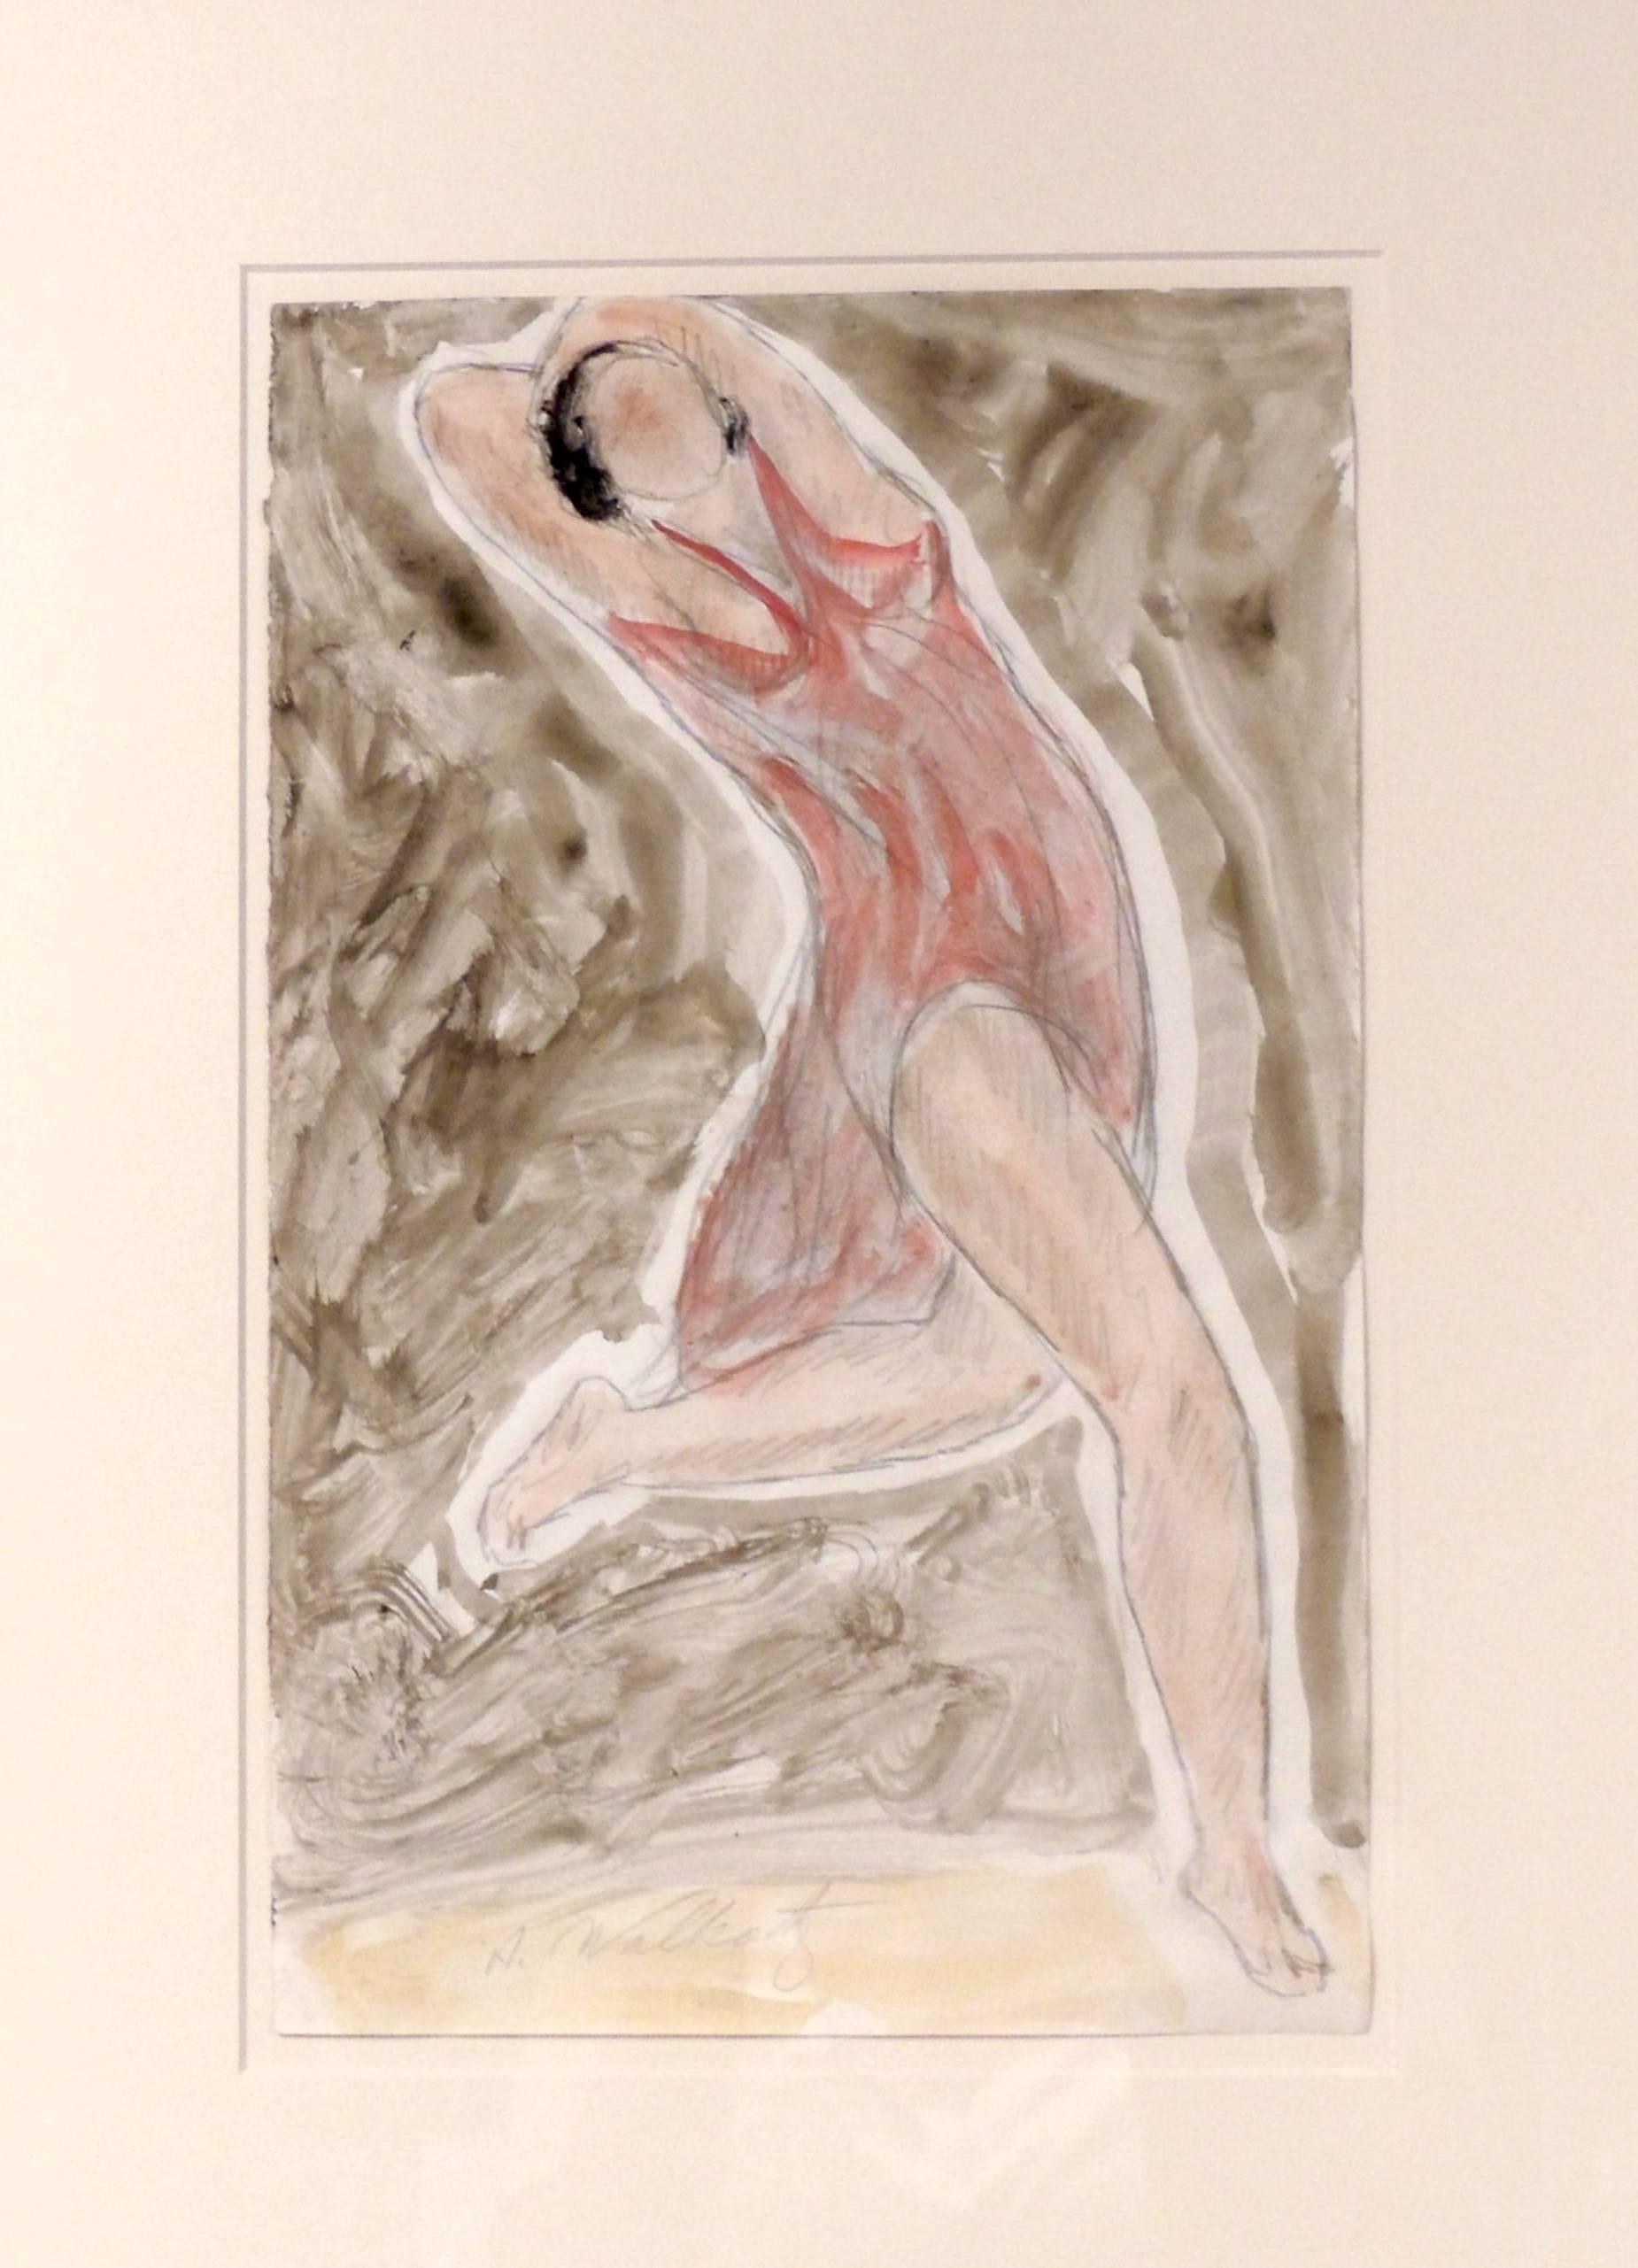 Abraham Walkowitz (1878-1965) had an intimate artistic relationship with the Modernist Dancer Isadora Duncan. He drew her in dance literally thousands of times. This drawing is a free flowing sketch of her in a red dress and is colored with